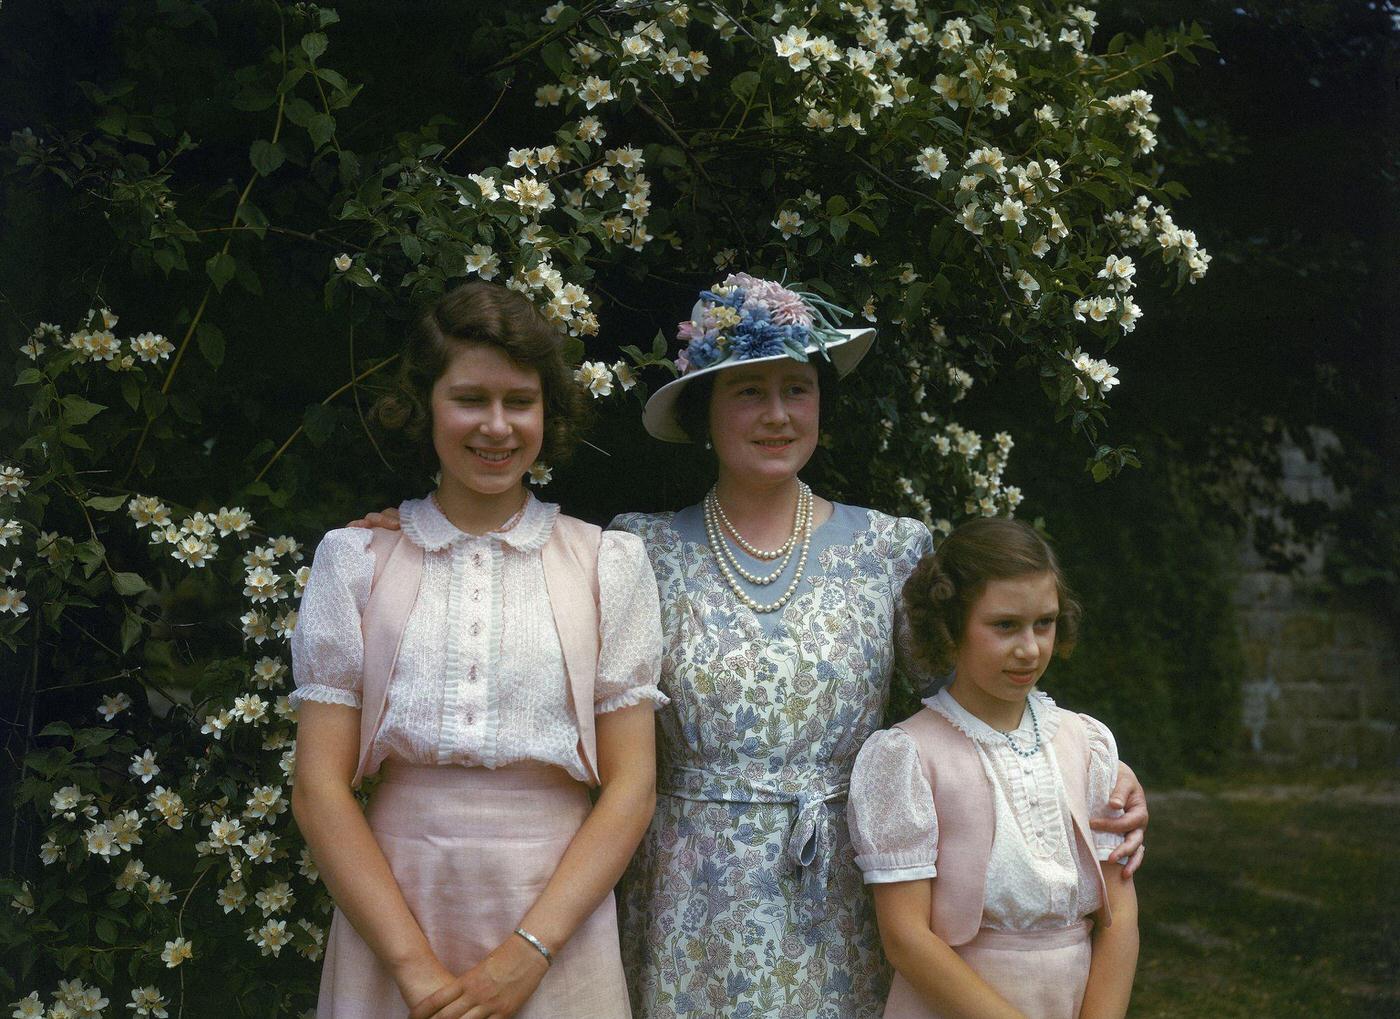 The Queen Mother with Princess Margaret and Princess Elizabeth at Windsor Castle in England on 8 July 1941.